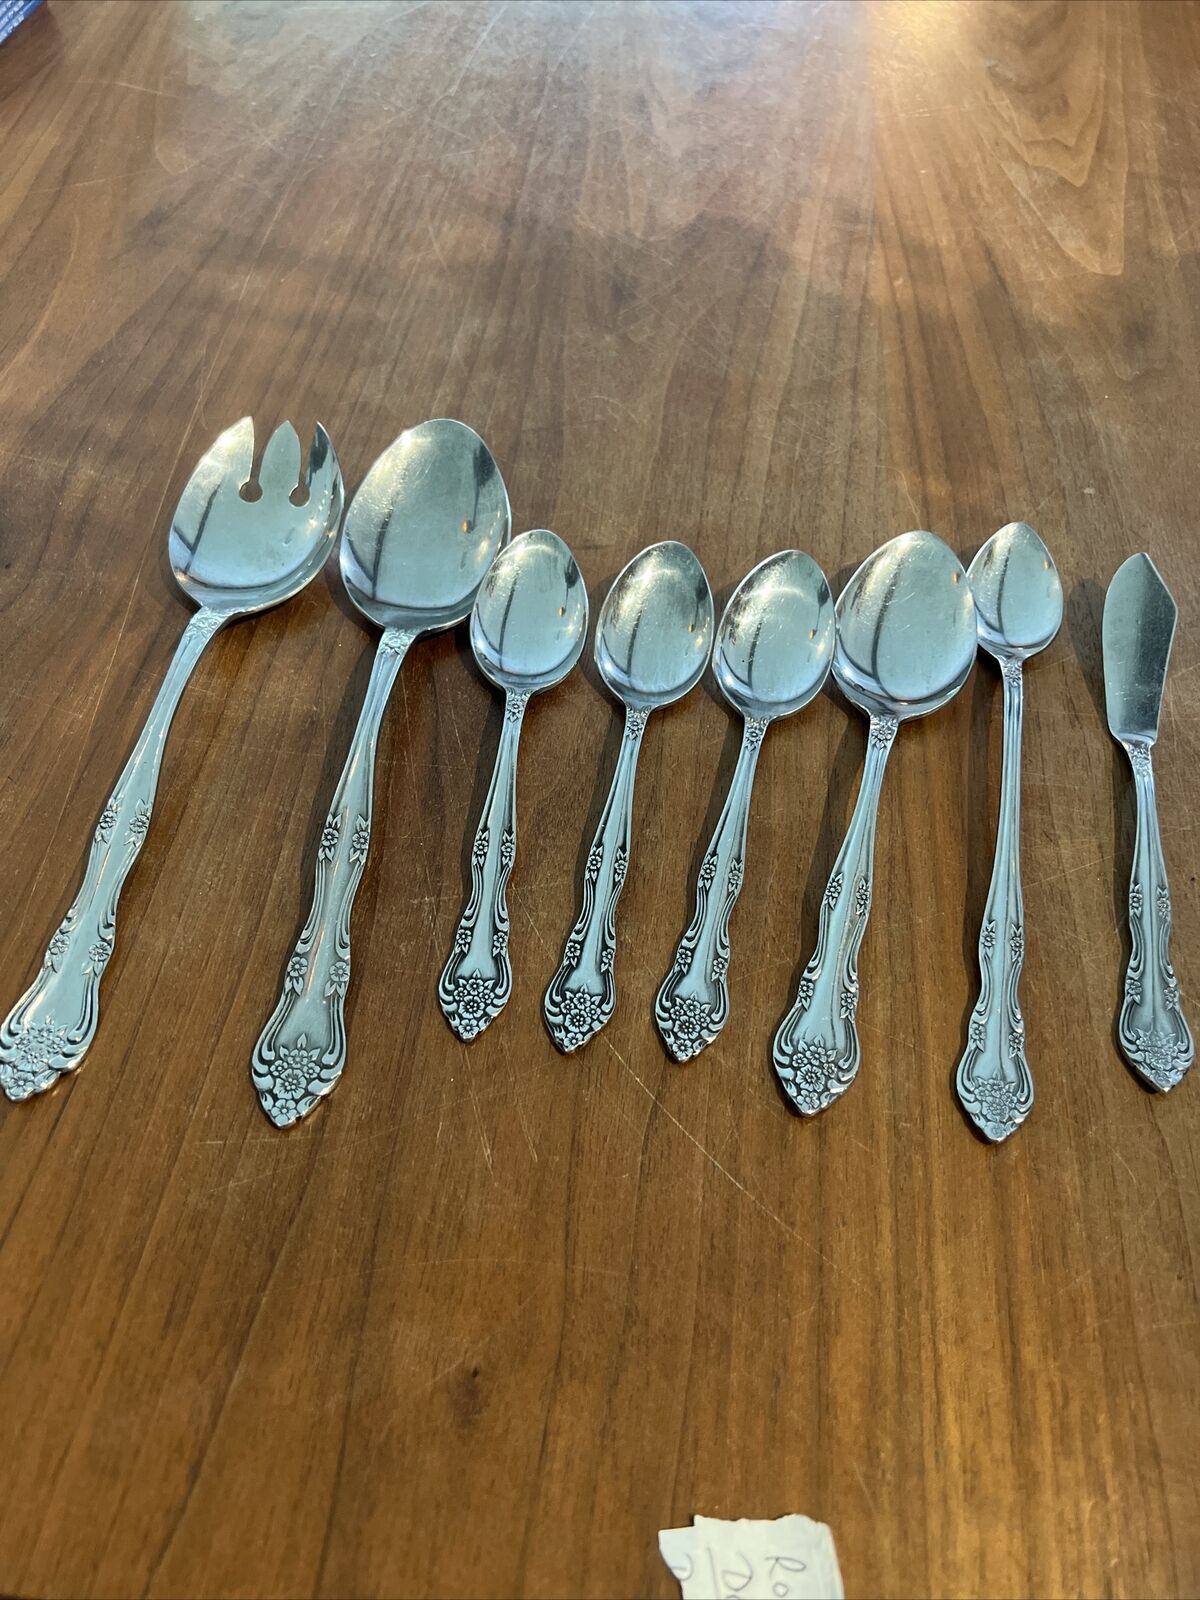 Stanley Roberts Rogers Dream Rose Mixed Spoon Set - 10 Flower - Stainless 8pcs